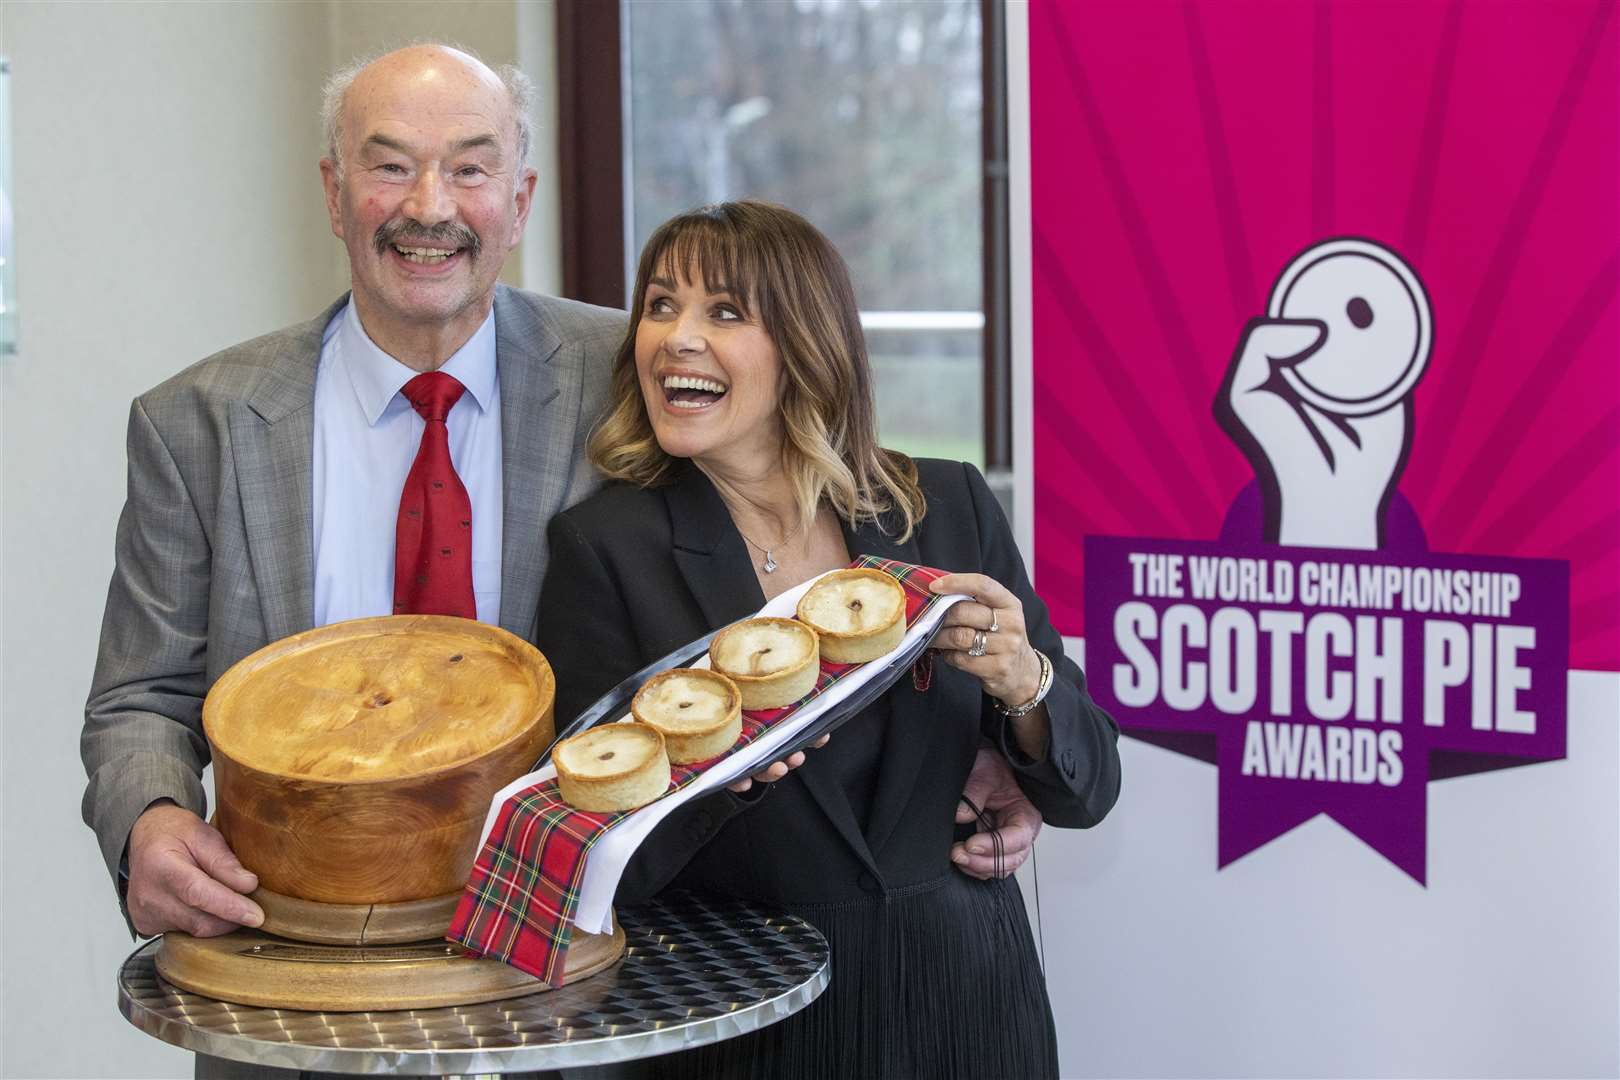 Awards host Carol Smille with Allan Pirie from James Pirie & Son who have won The World Championship Scotch Pie Award.